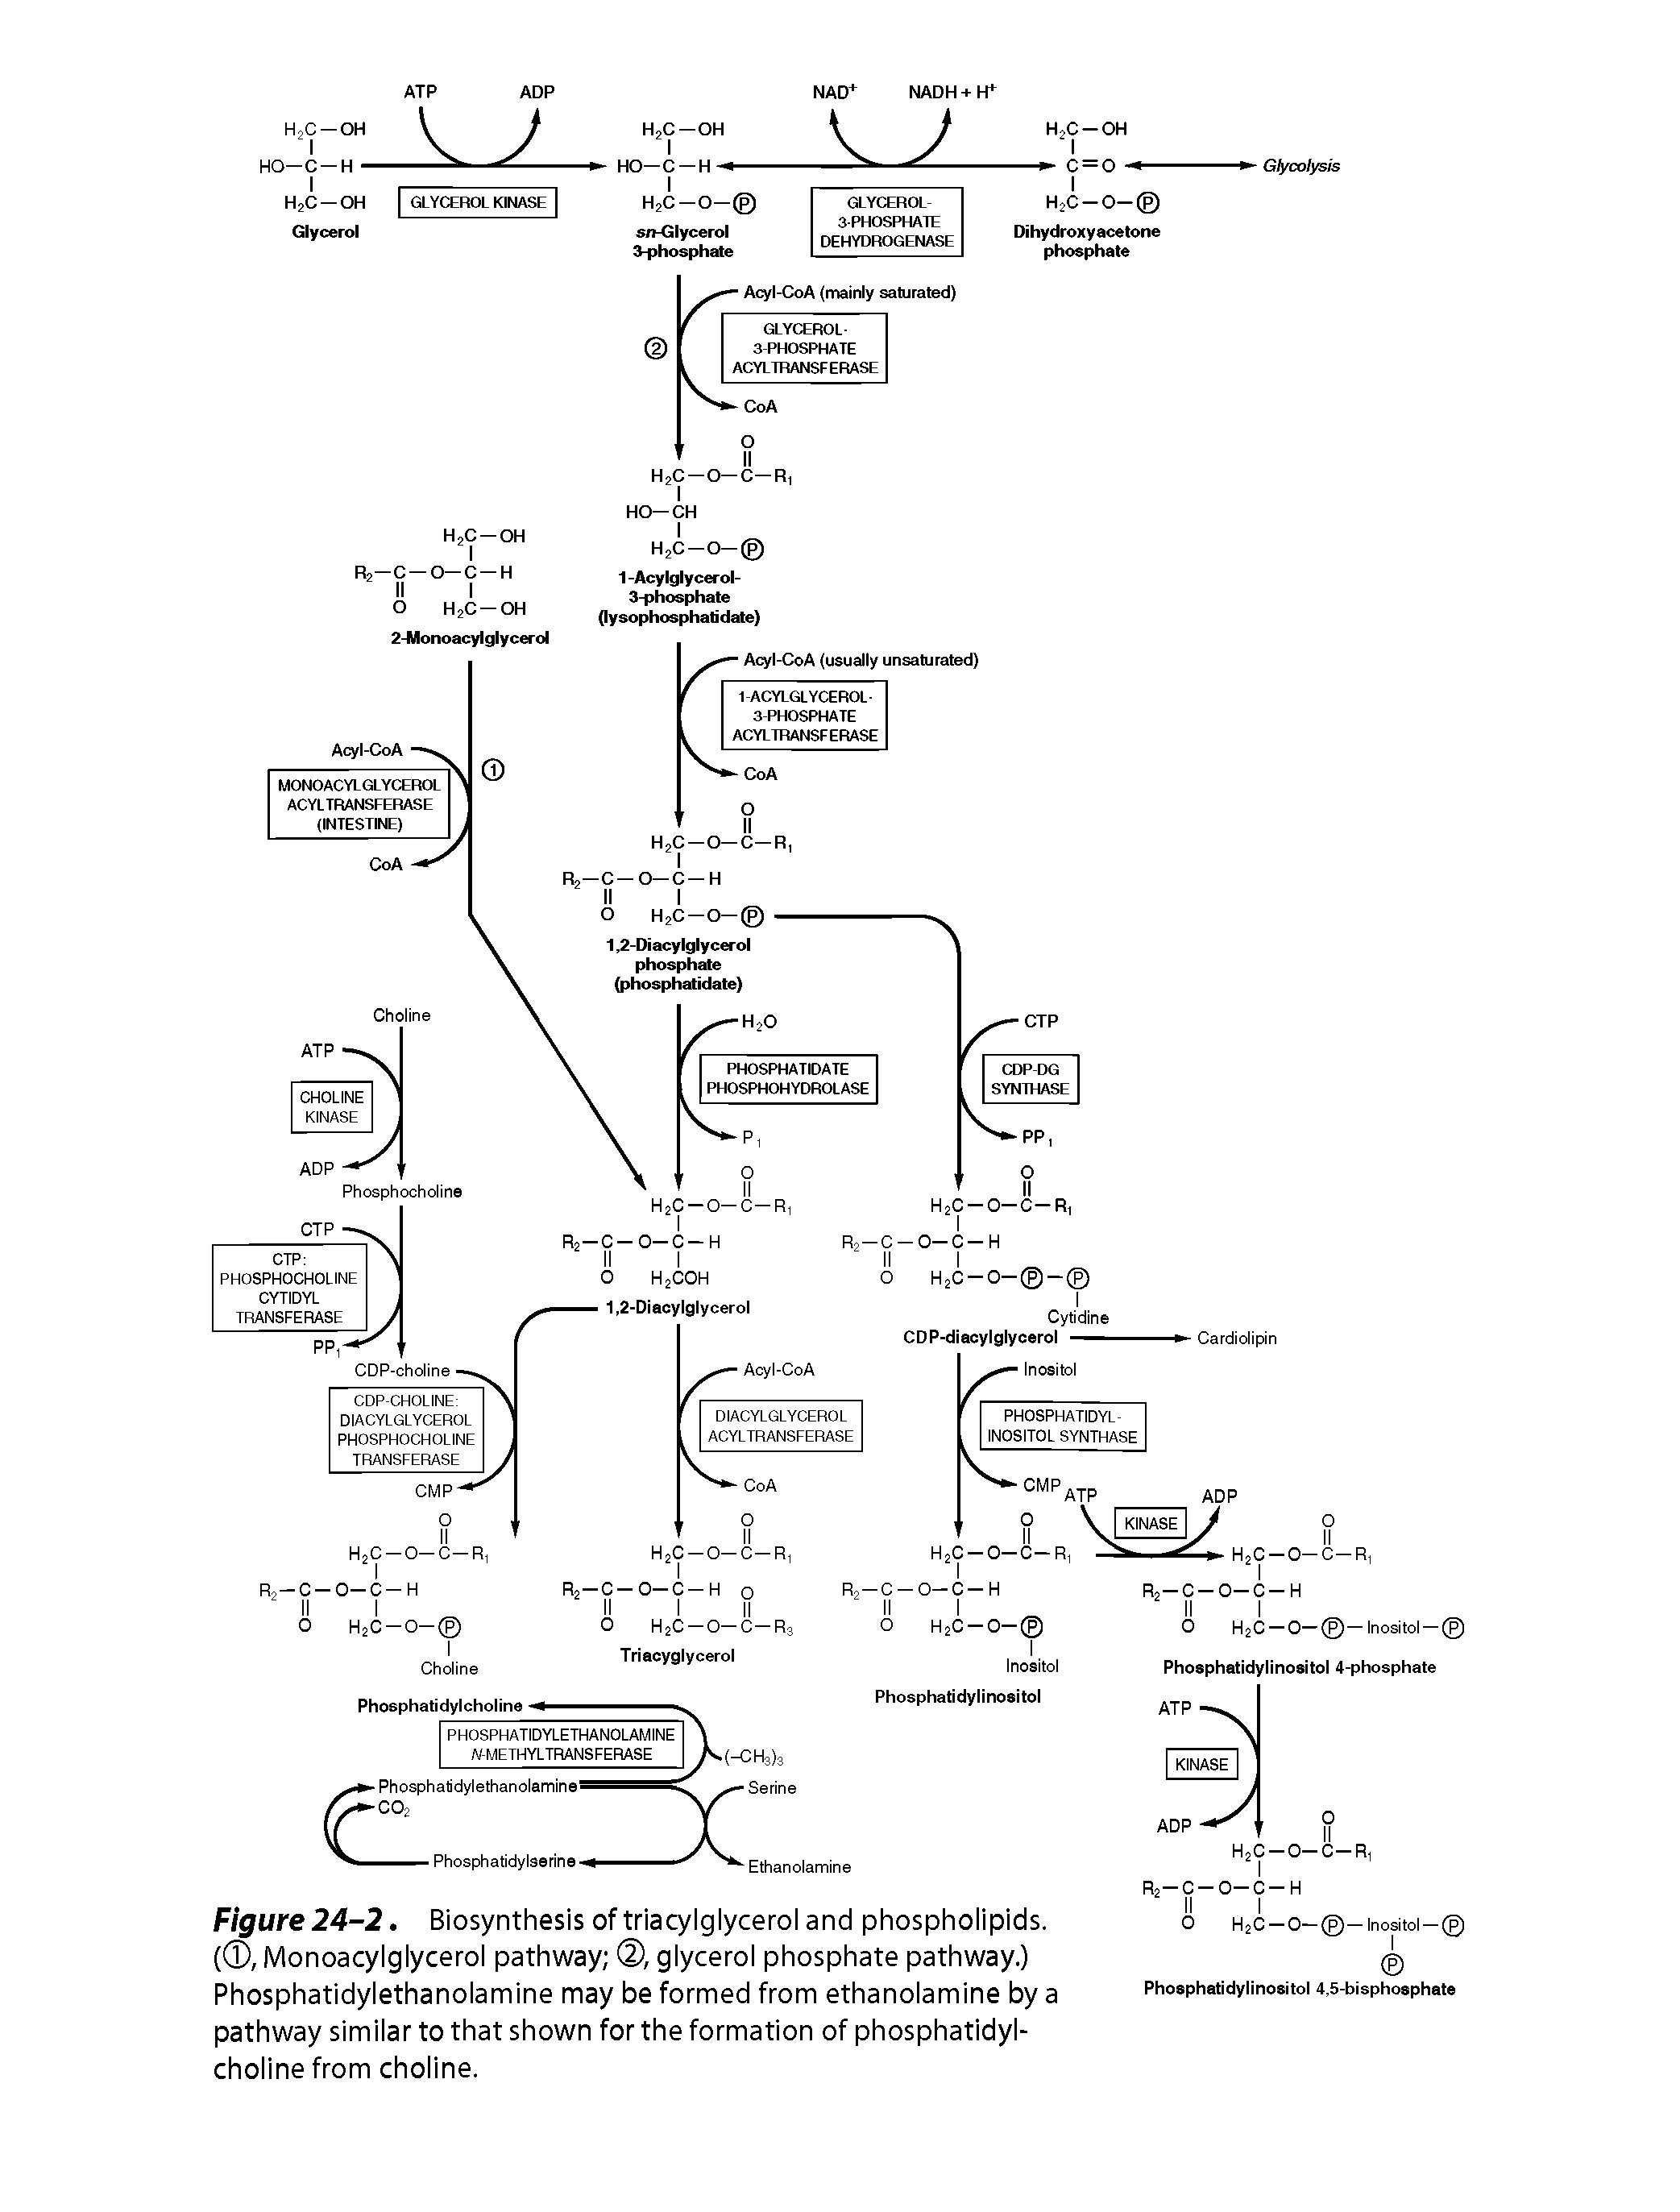 Figure 24-2. Biosynthesis of triaq/lglycerol and phospholipids. ( , Monoacylglycerol pathway (D, glycerol phosphate pathway.) Phosphatidylethanolamine may be formed from ethanolamine by a pathway similar to that shown for the formation of phosphatidylcholine from choline.